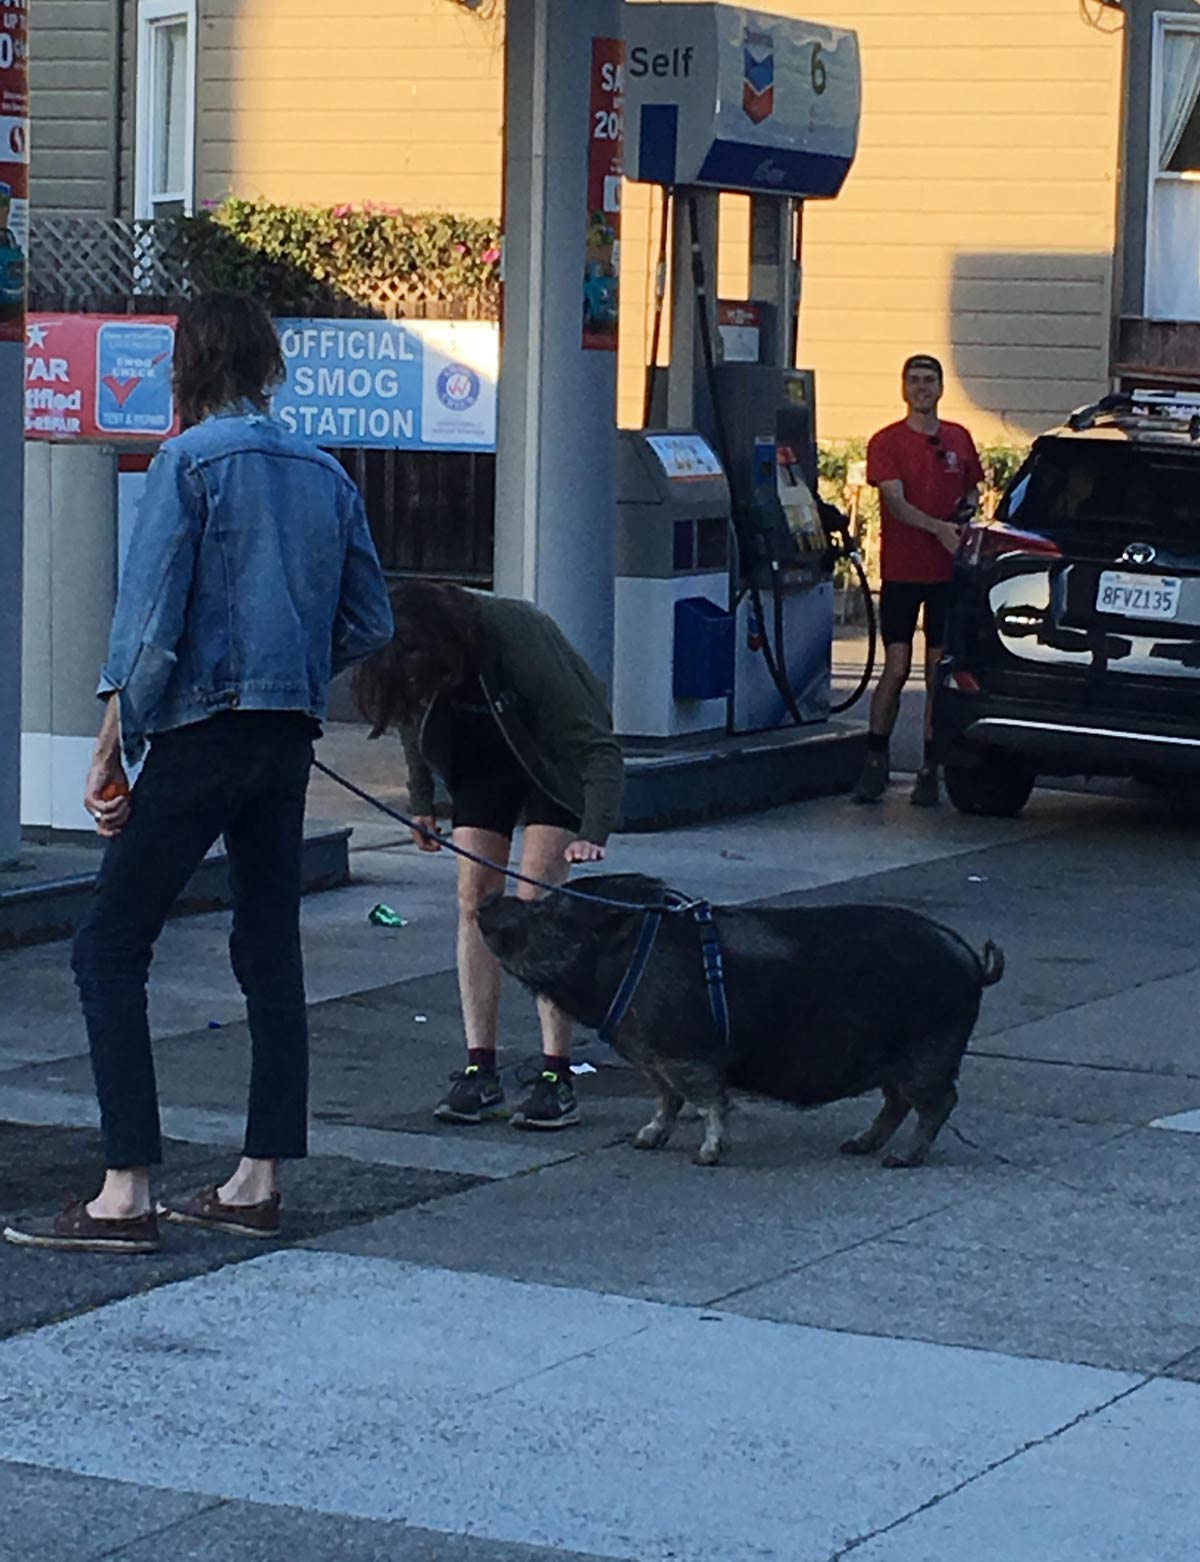 I see this guy walking his pig all the time. Near Haight-Ashbury in San Francisco